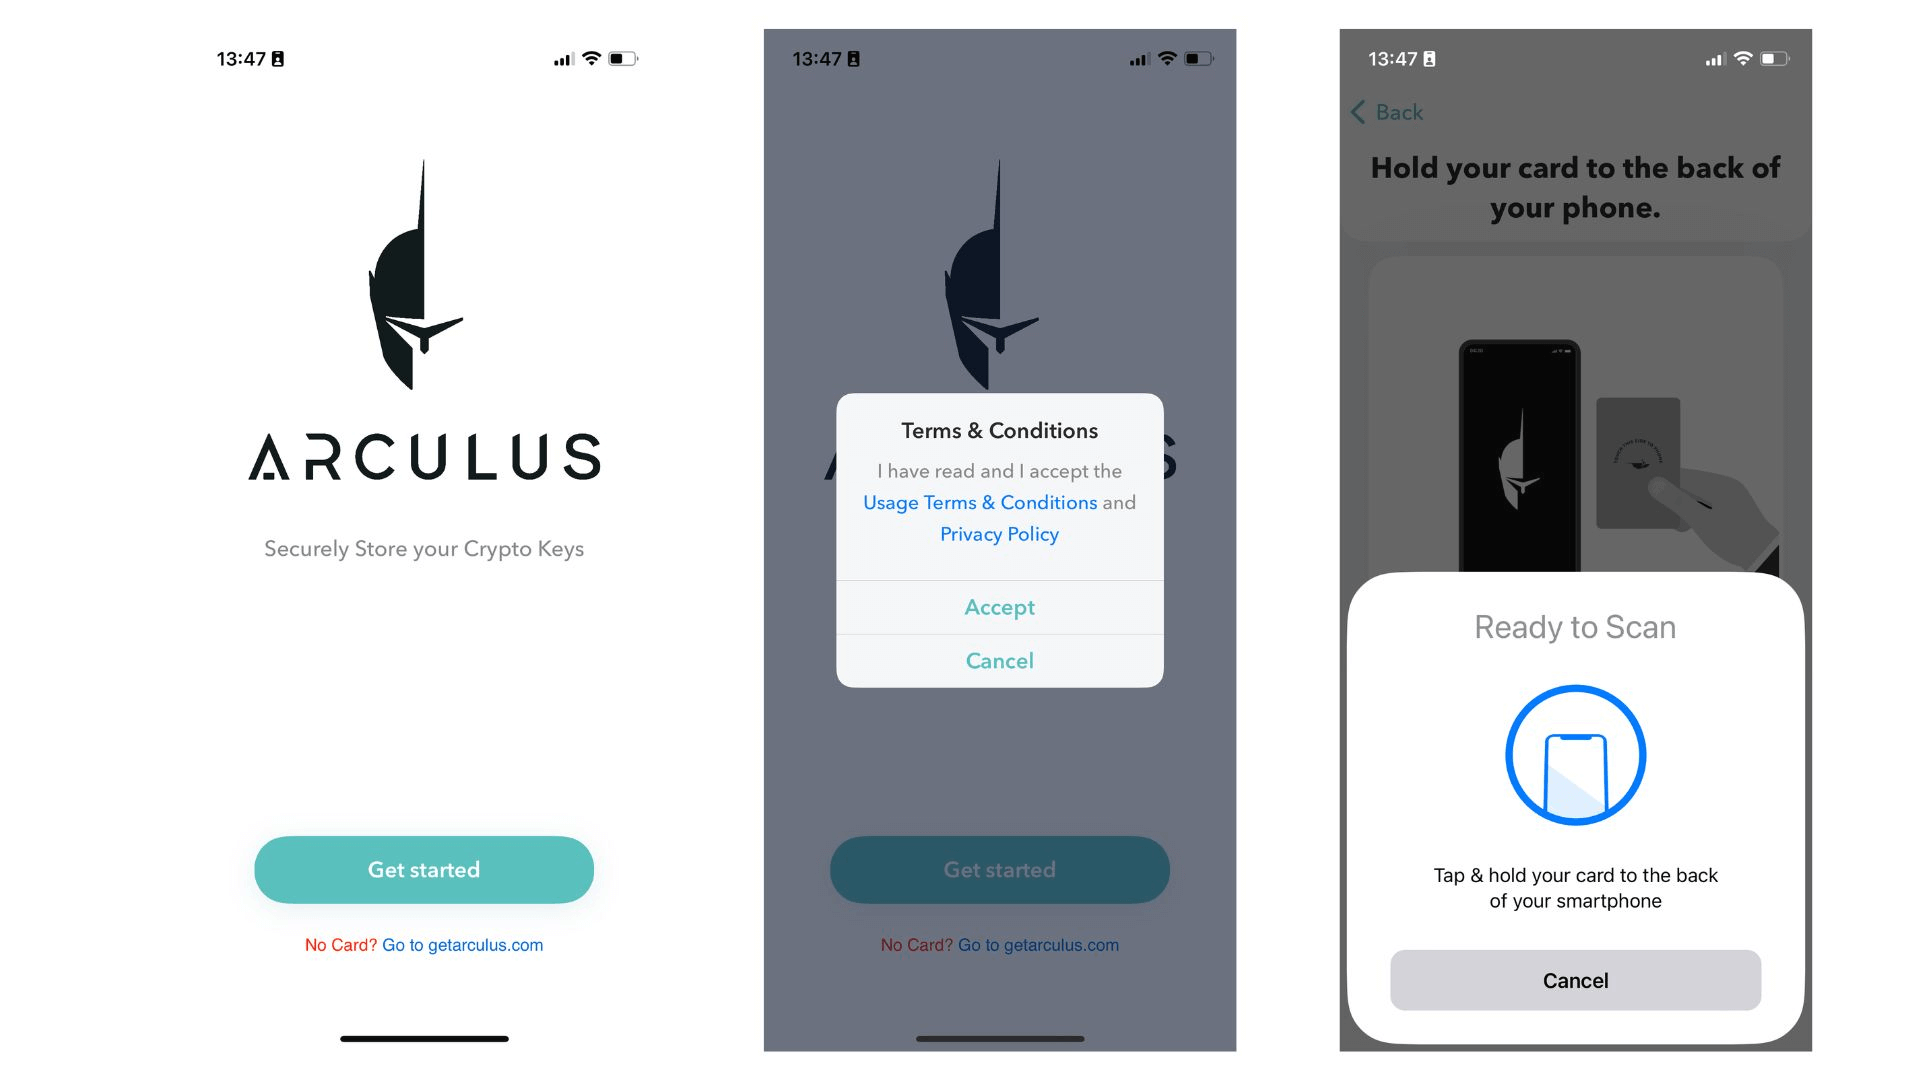 Step 3: Proceed to create a new wallet and follow the instructions from the app. Be sure to read the Terms and Conditions and the Privacy Policy.